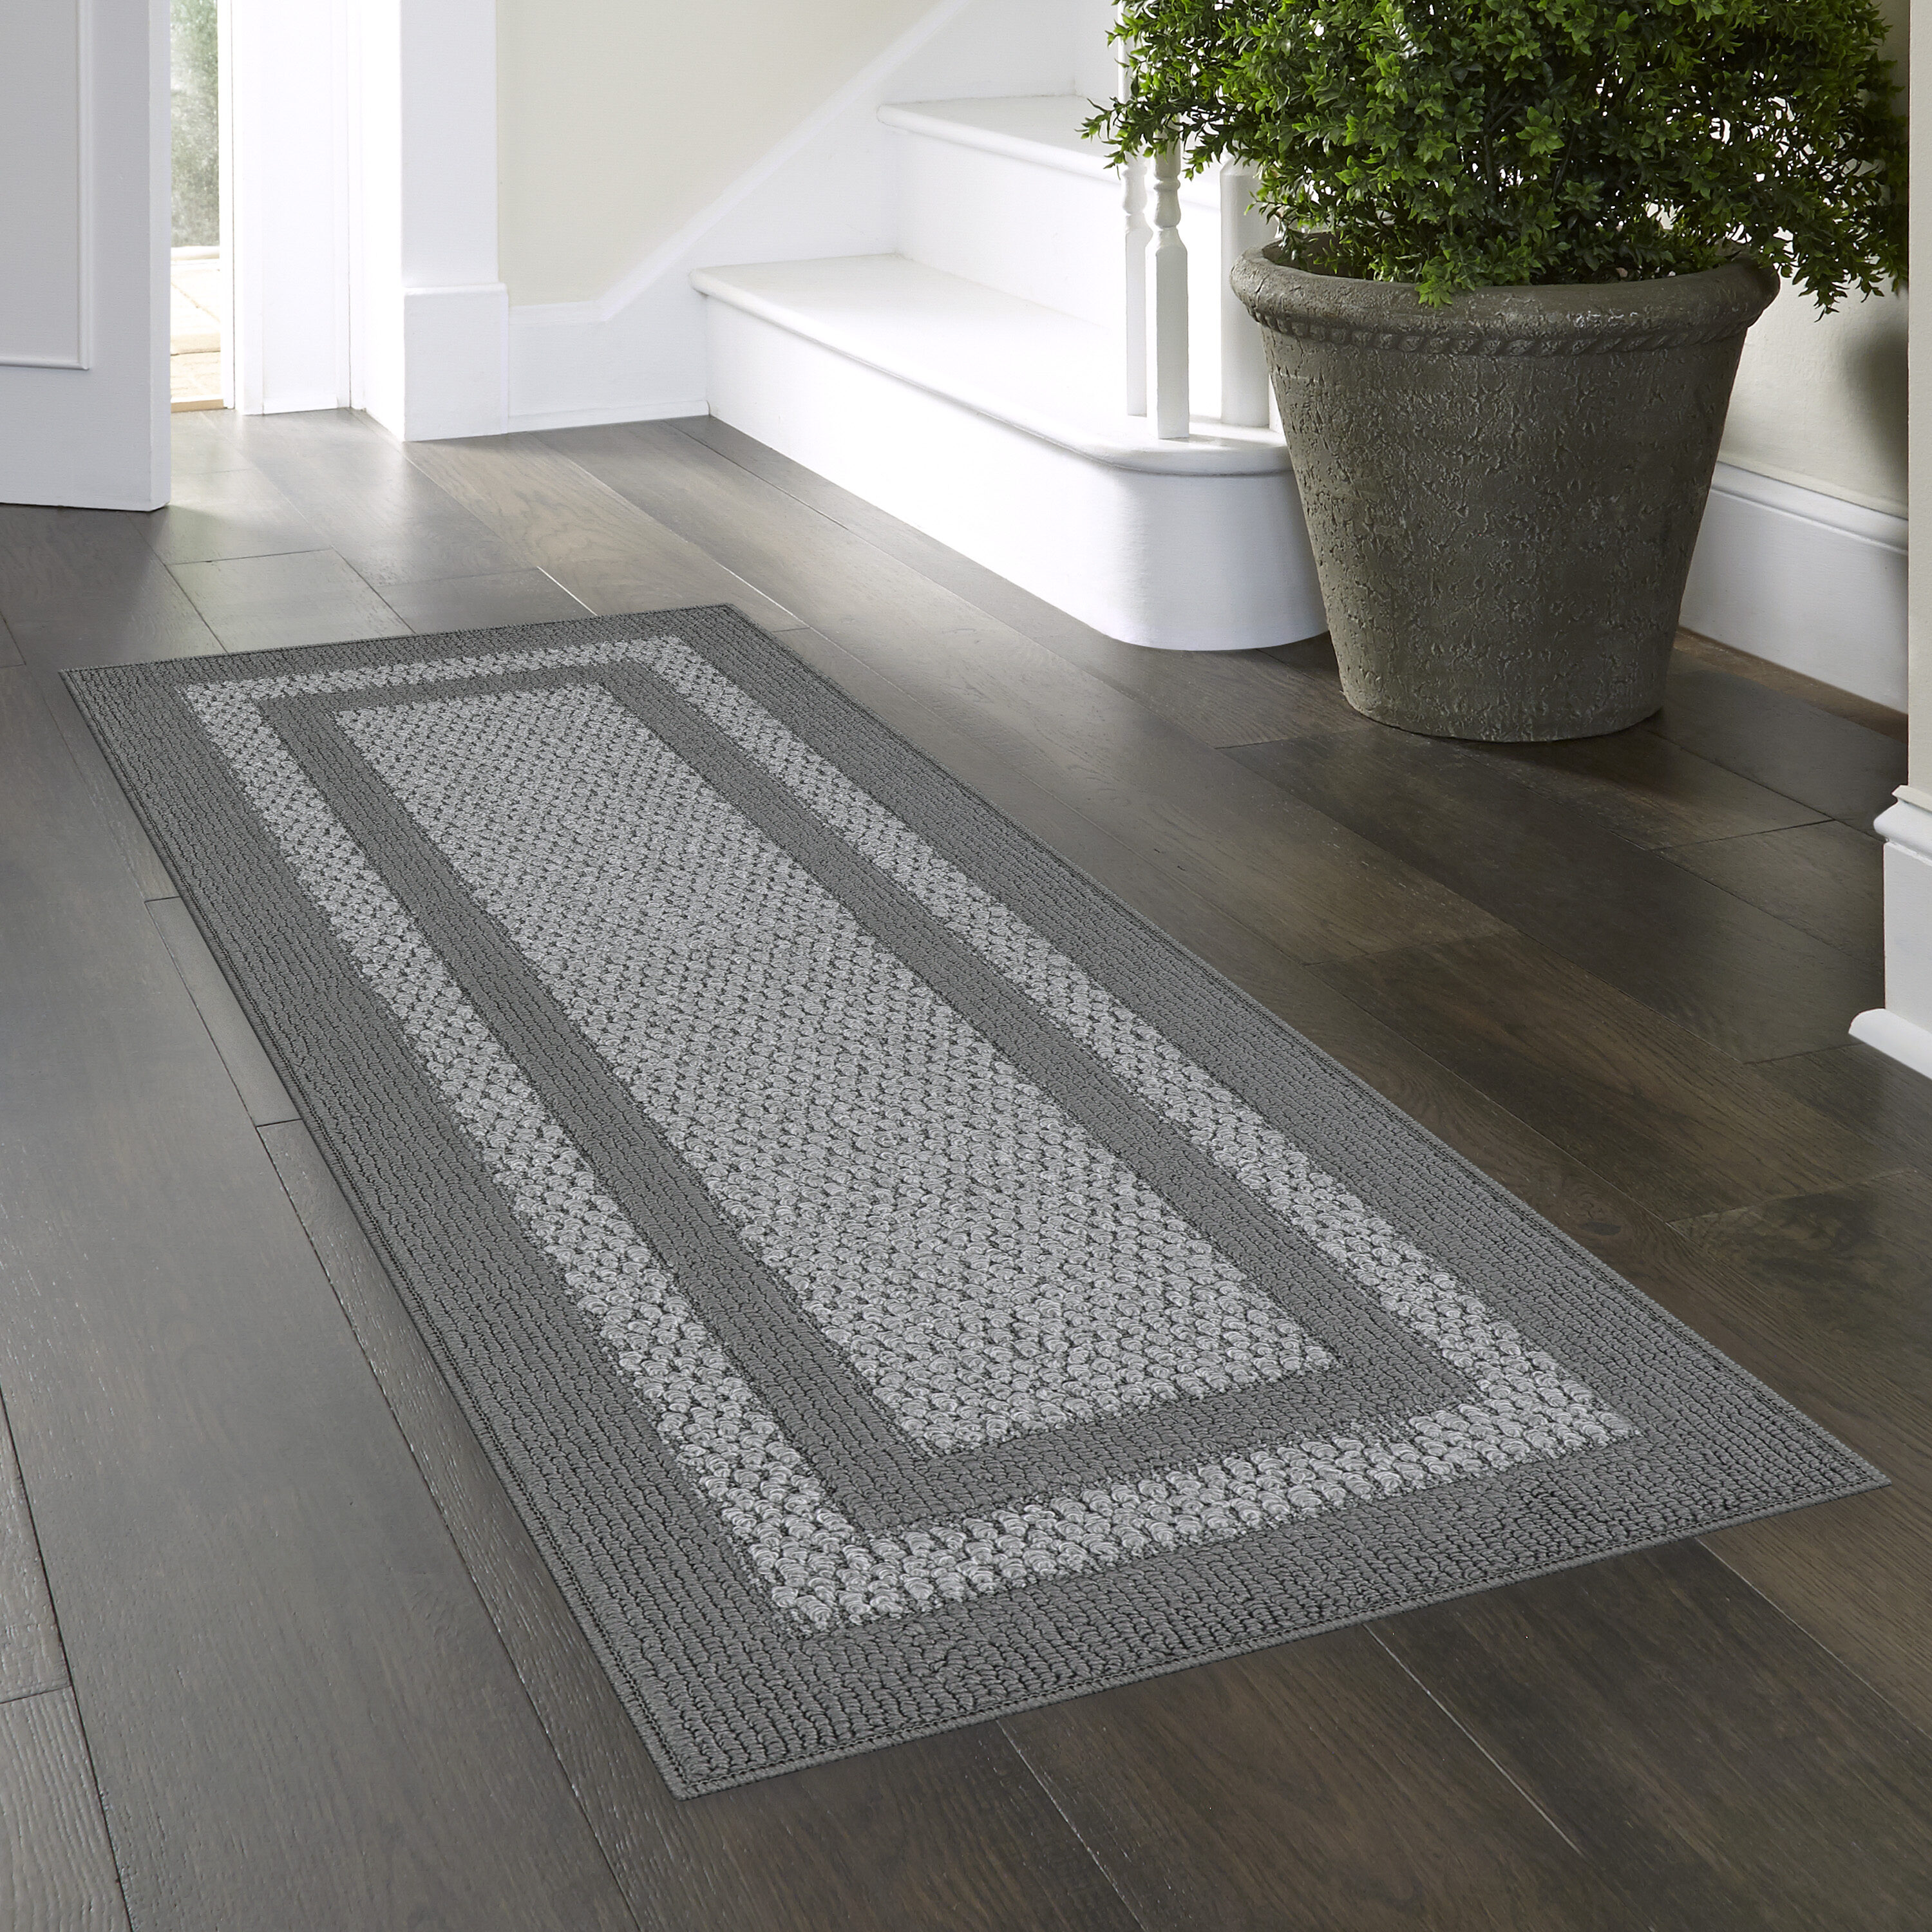 2' x 6' Runner Rugs with Rubber Backing, Indoor Outdoor Utility Carpet  Runner Rugs, Stripe Gray, Can Be Used as Aisle for The RV and Boat, Laundry